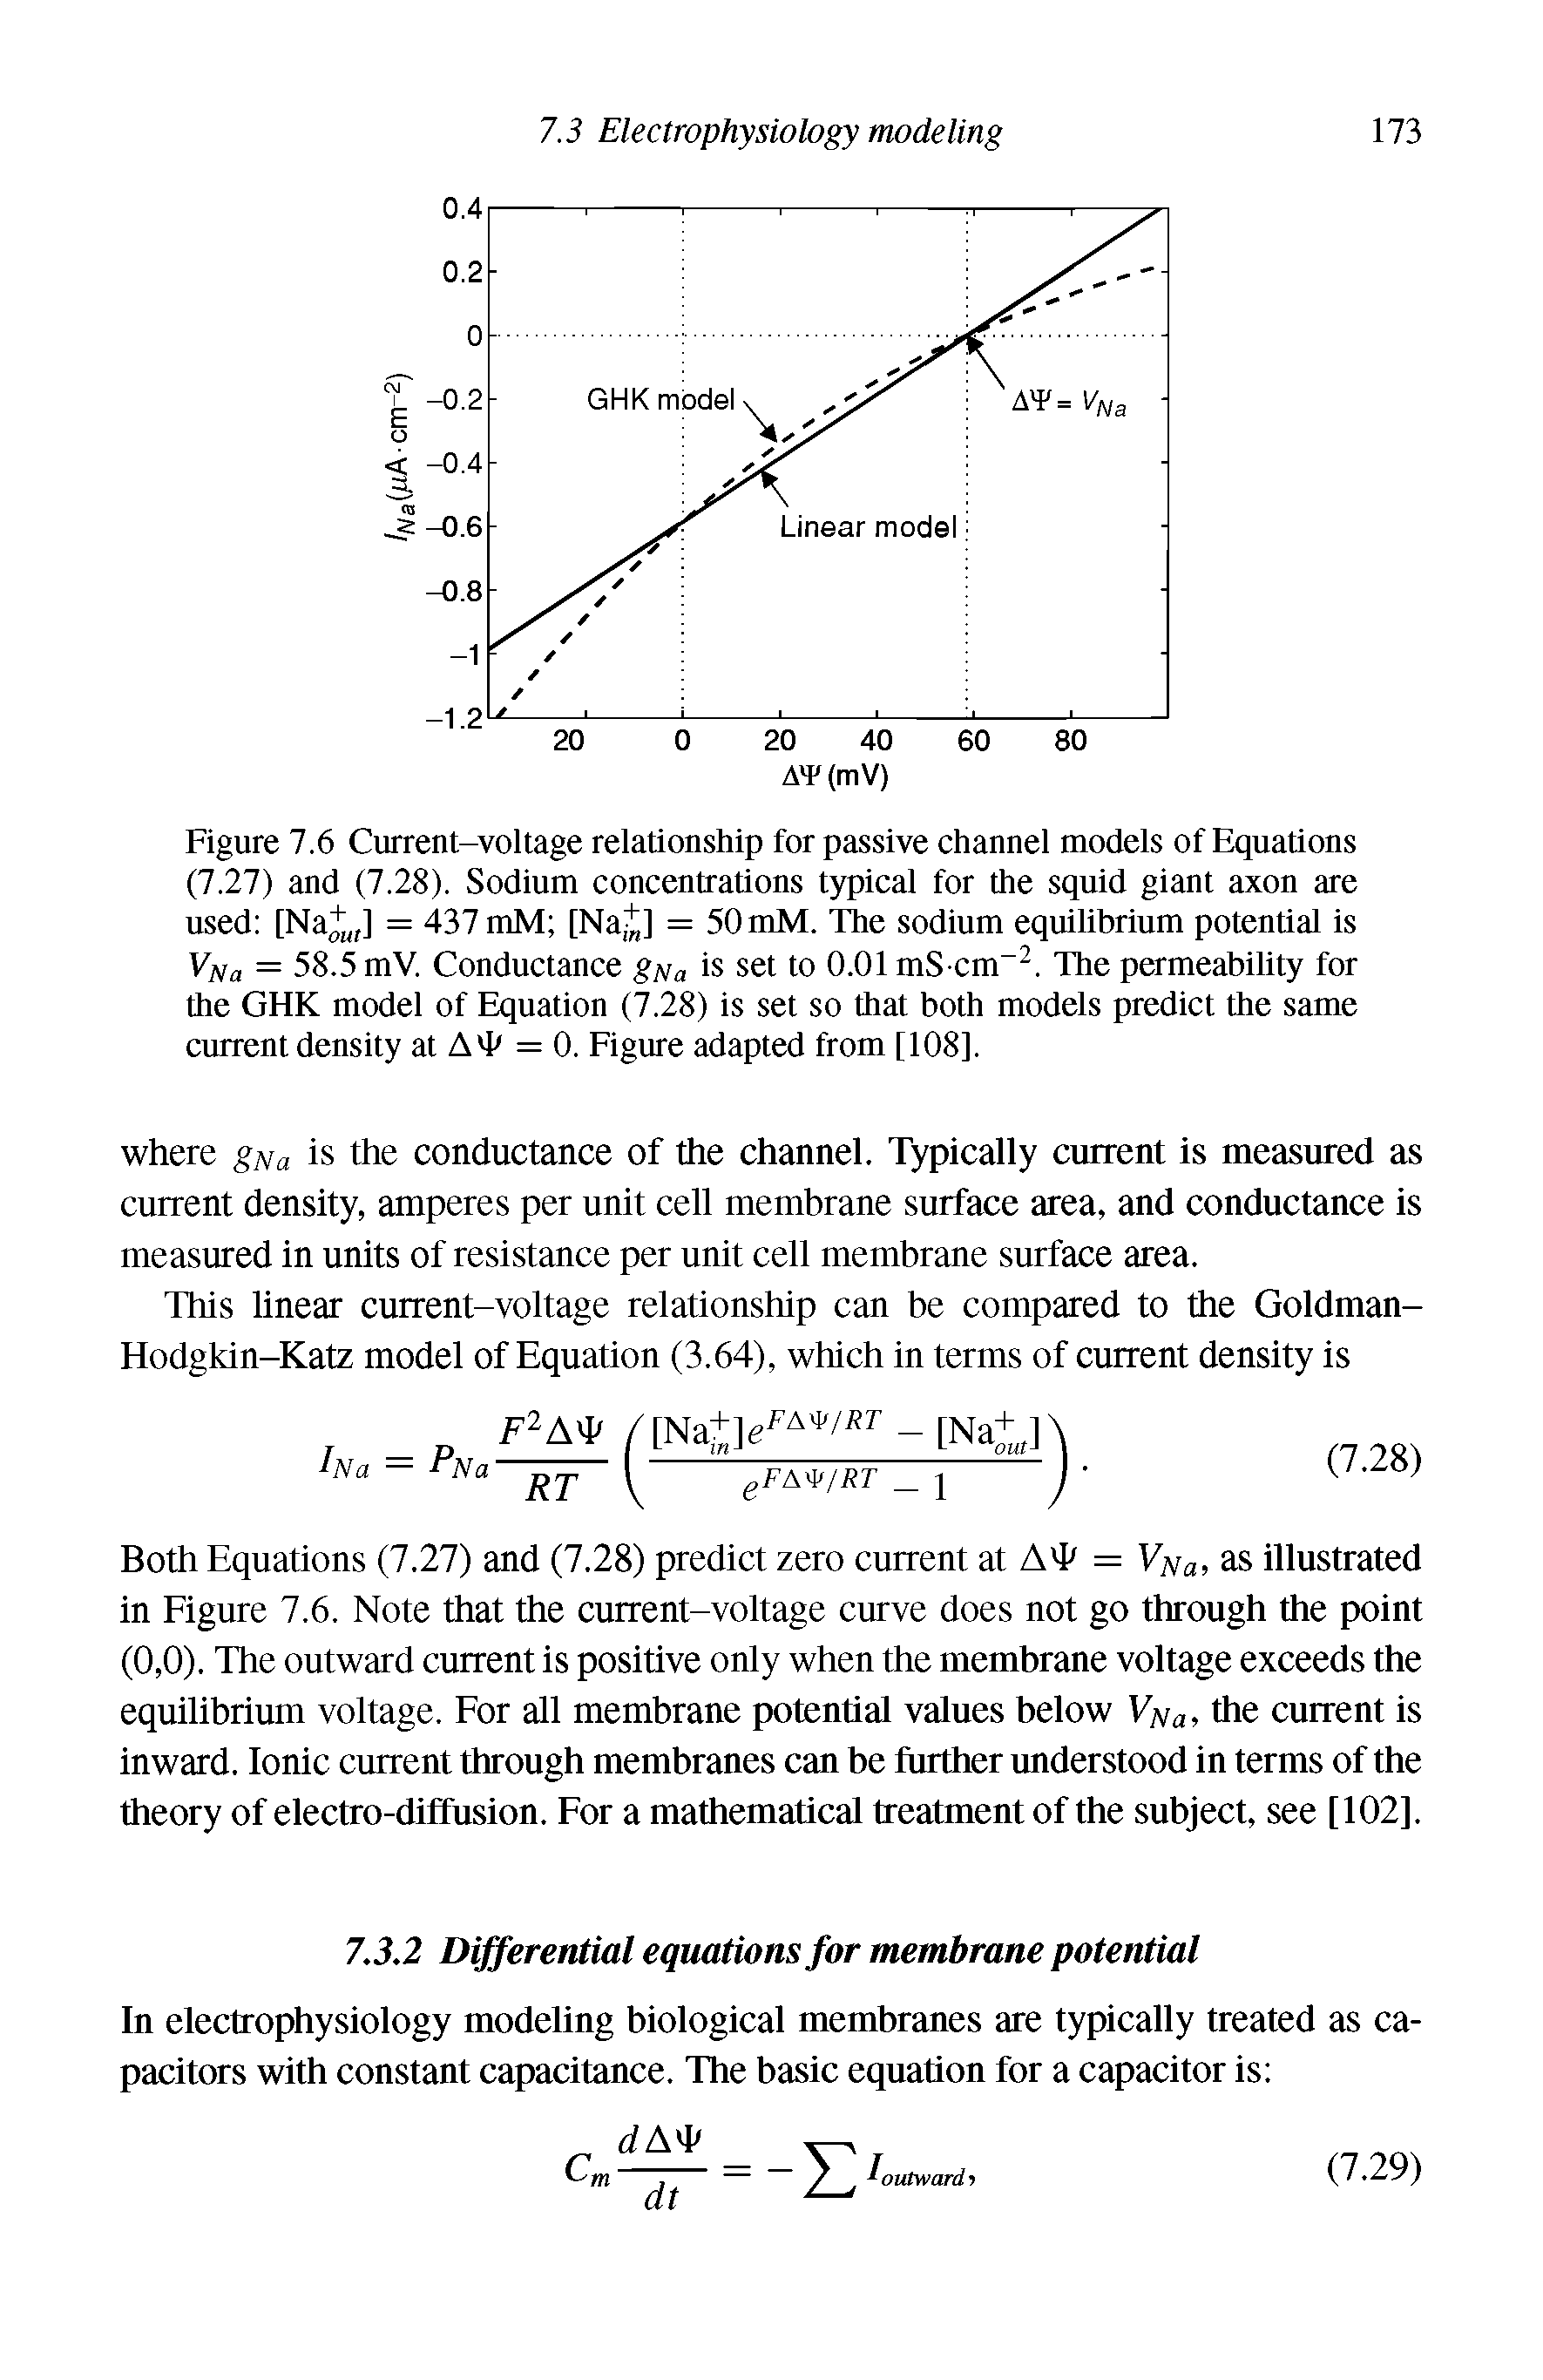 Figure 7.6 Current-voltage relationship for passive channel models of Equations (7.27) and (7.28). Sodium concentrations typical for the squid giant axon are used [Na+ ] = 437 mM [Na J = 50 mM. The sodium equilibrium potential is VNa = 58.5 mV. Conductance g a is set to 0.01 mS-cm-2. The permeability for the GHK model of Equation (7.28) is set so that both models predict the same current density at AT = 0. Figure adapted from [108],...